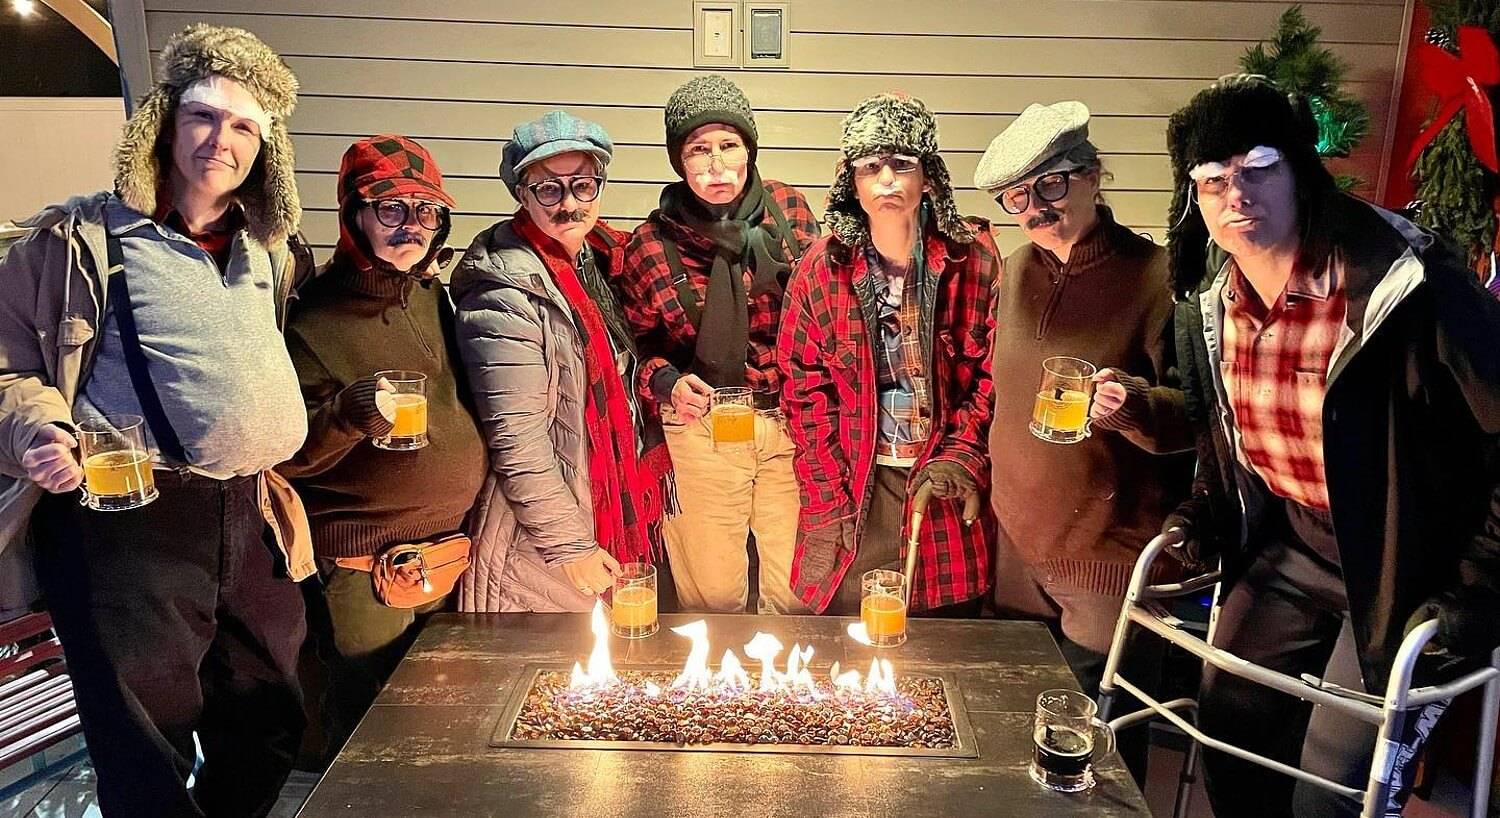 Seven girls dressed up as old men drinking beer around a firepit table